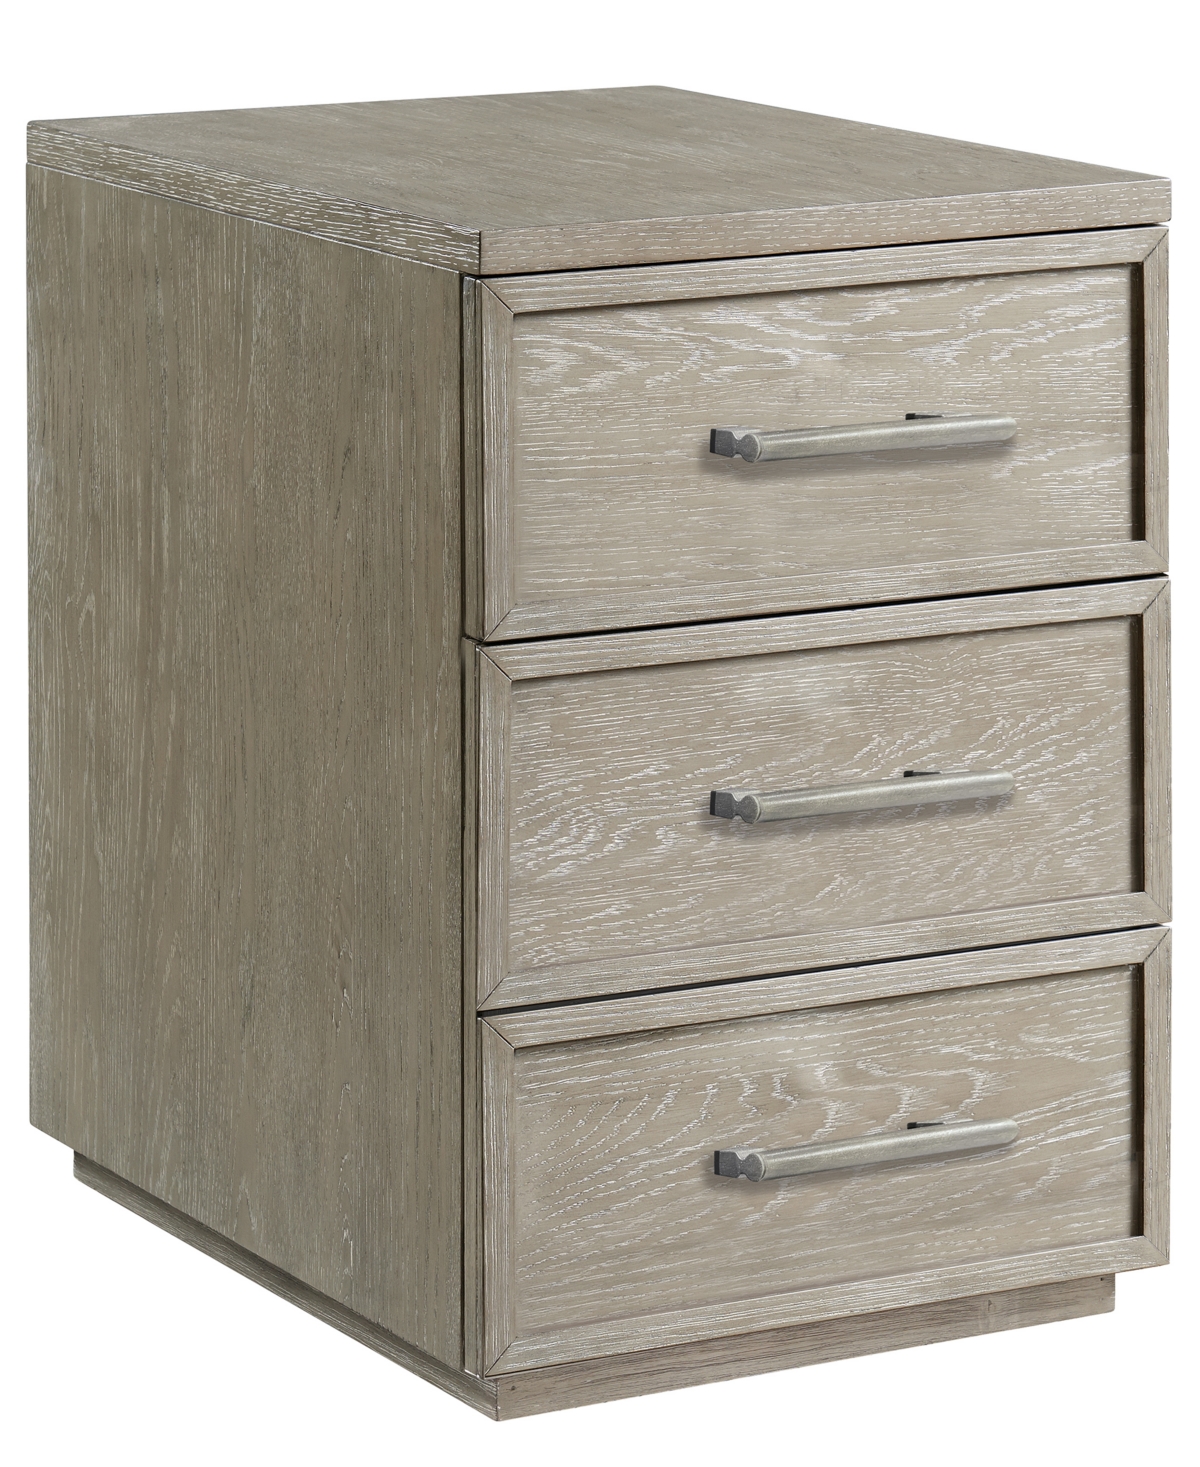 Furniture Fresh Perspectives 24" Wood Dovetail Joinery Mobile File Cabinet In Causal Taupe